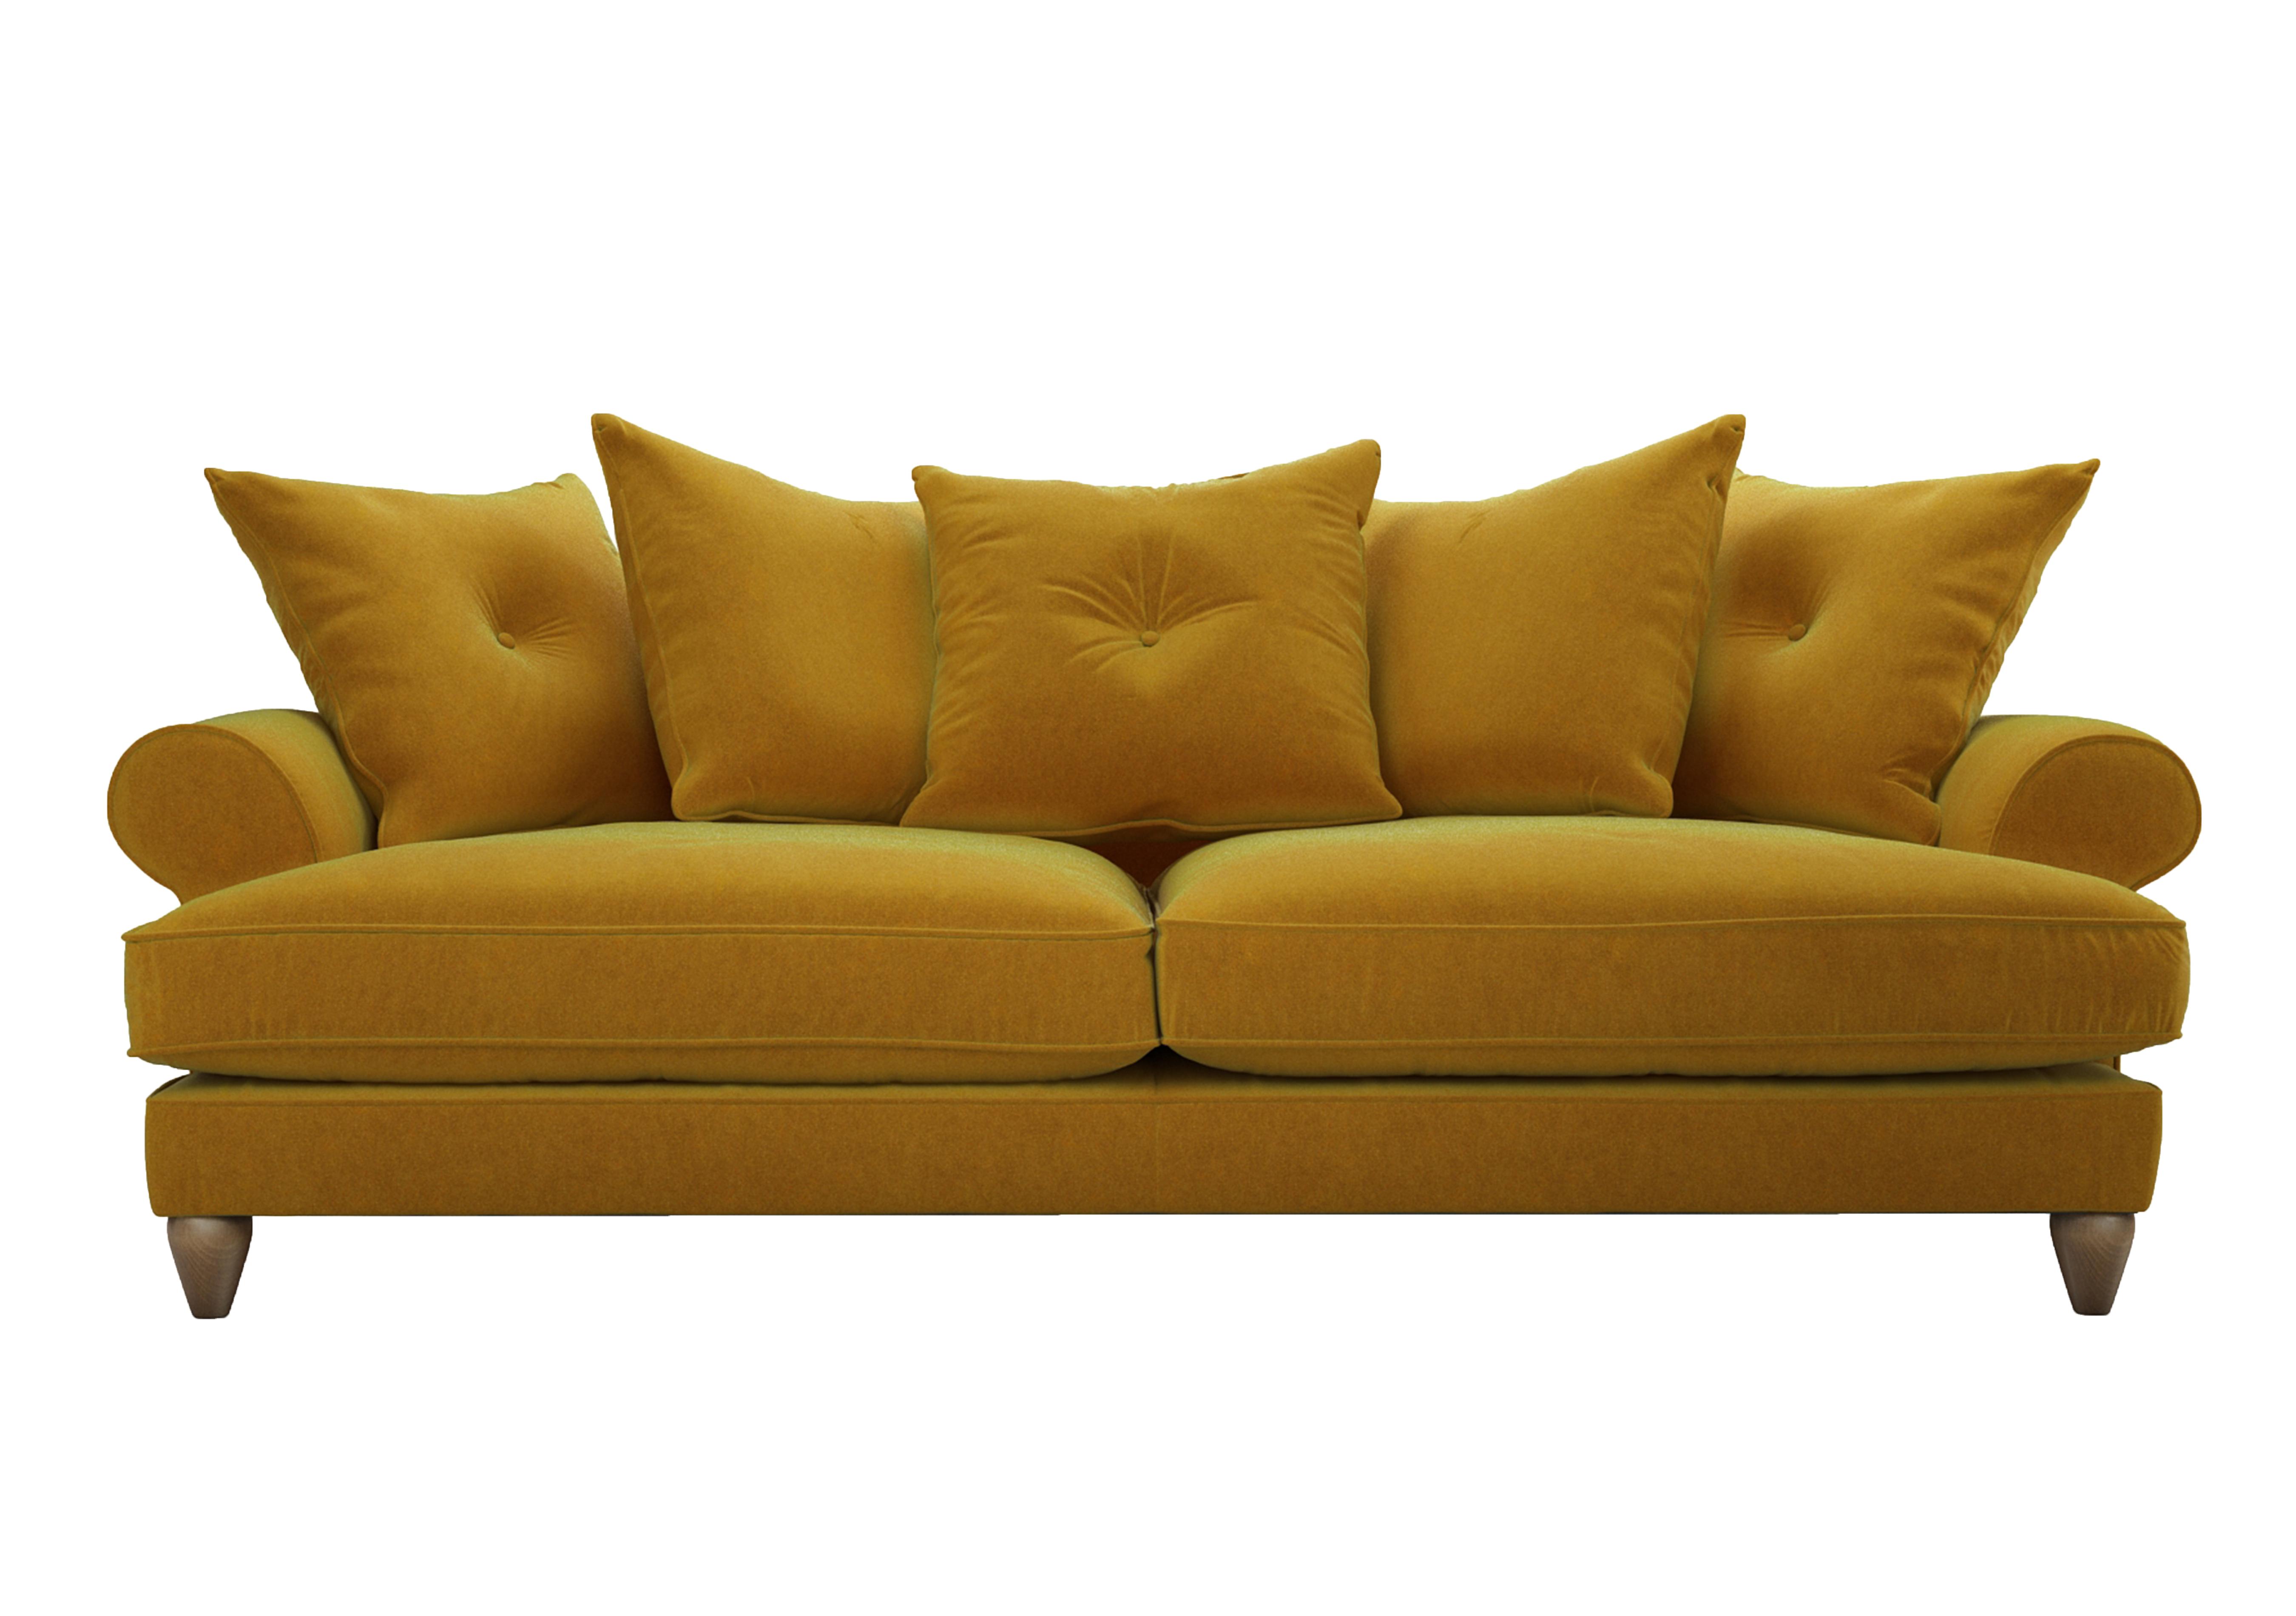 Bronwyn 4 Seater Fabric Scatter Back Sofa in Gol204 Golden Spice on Furniture Village